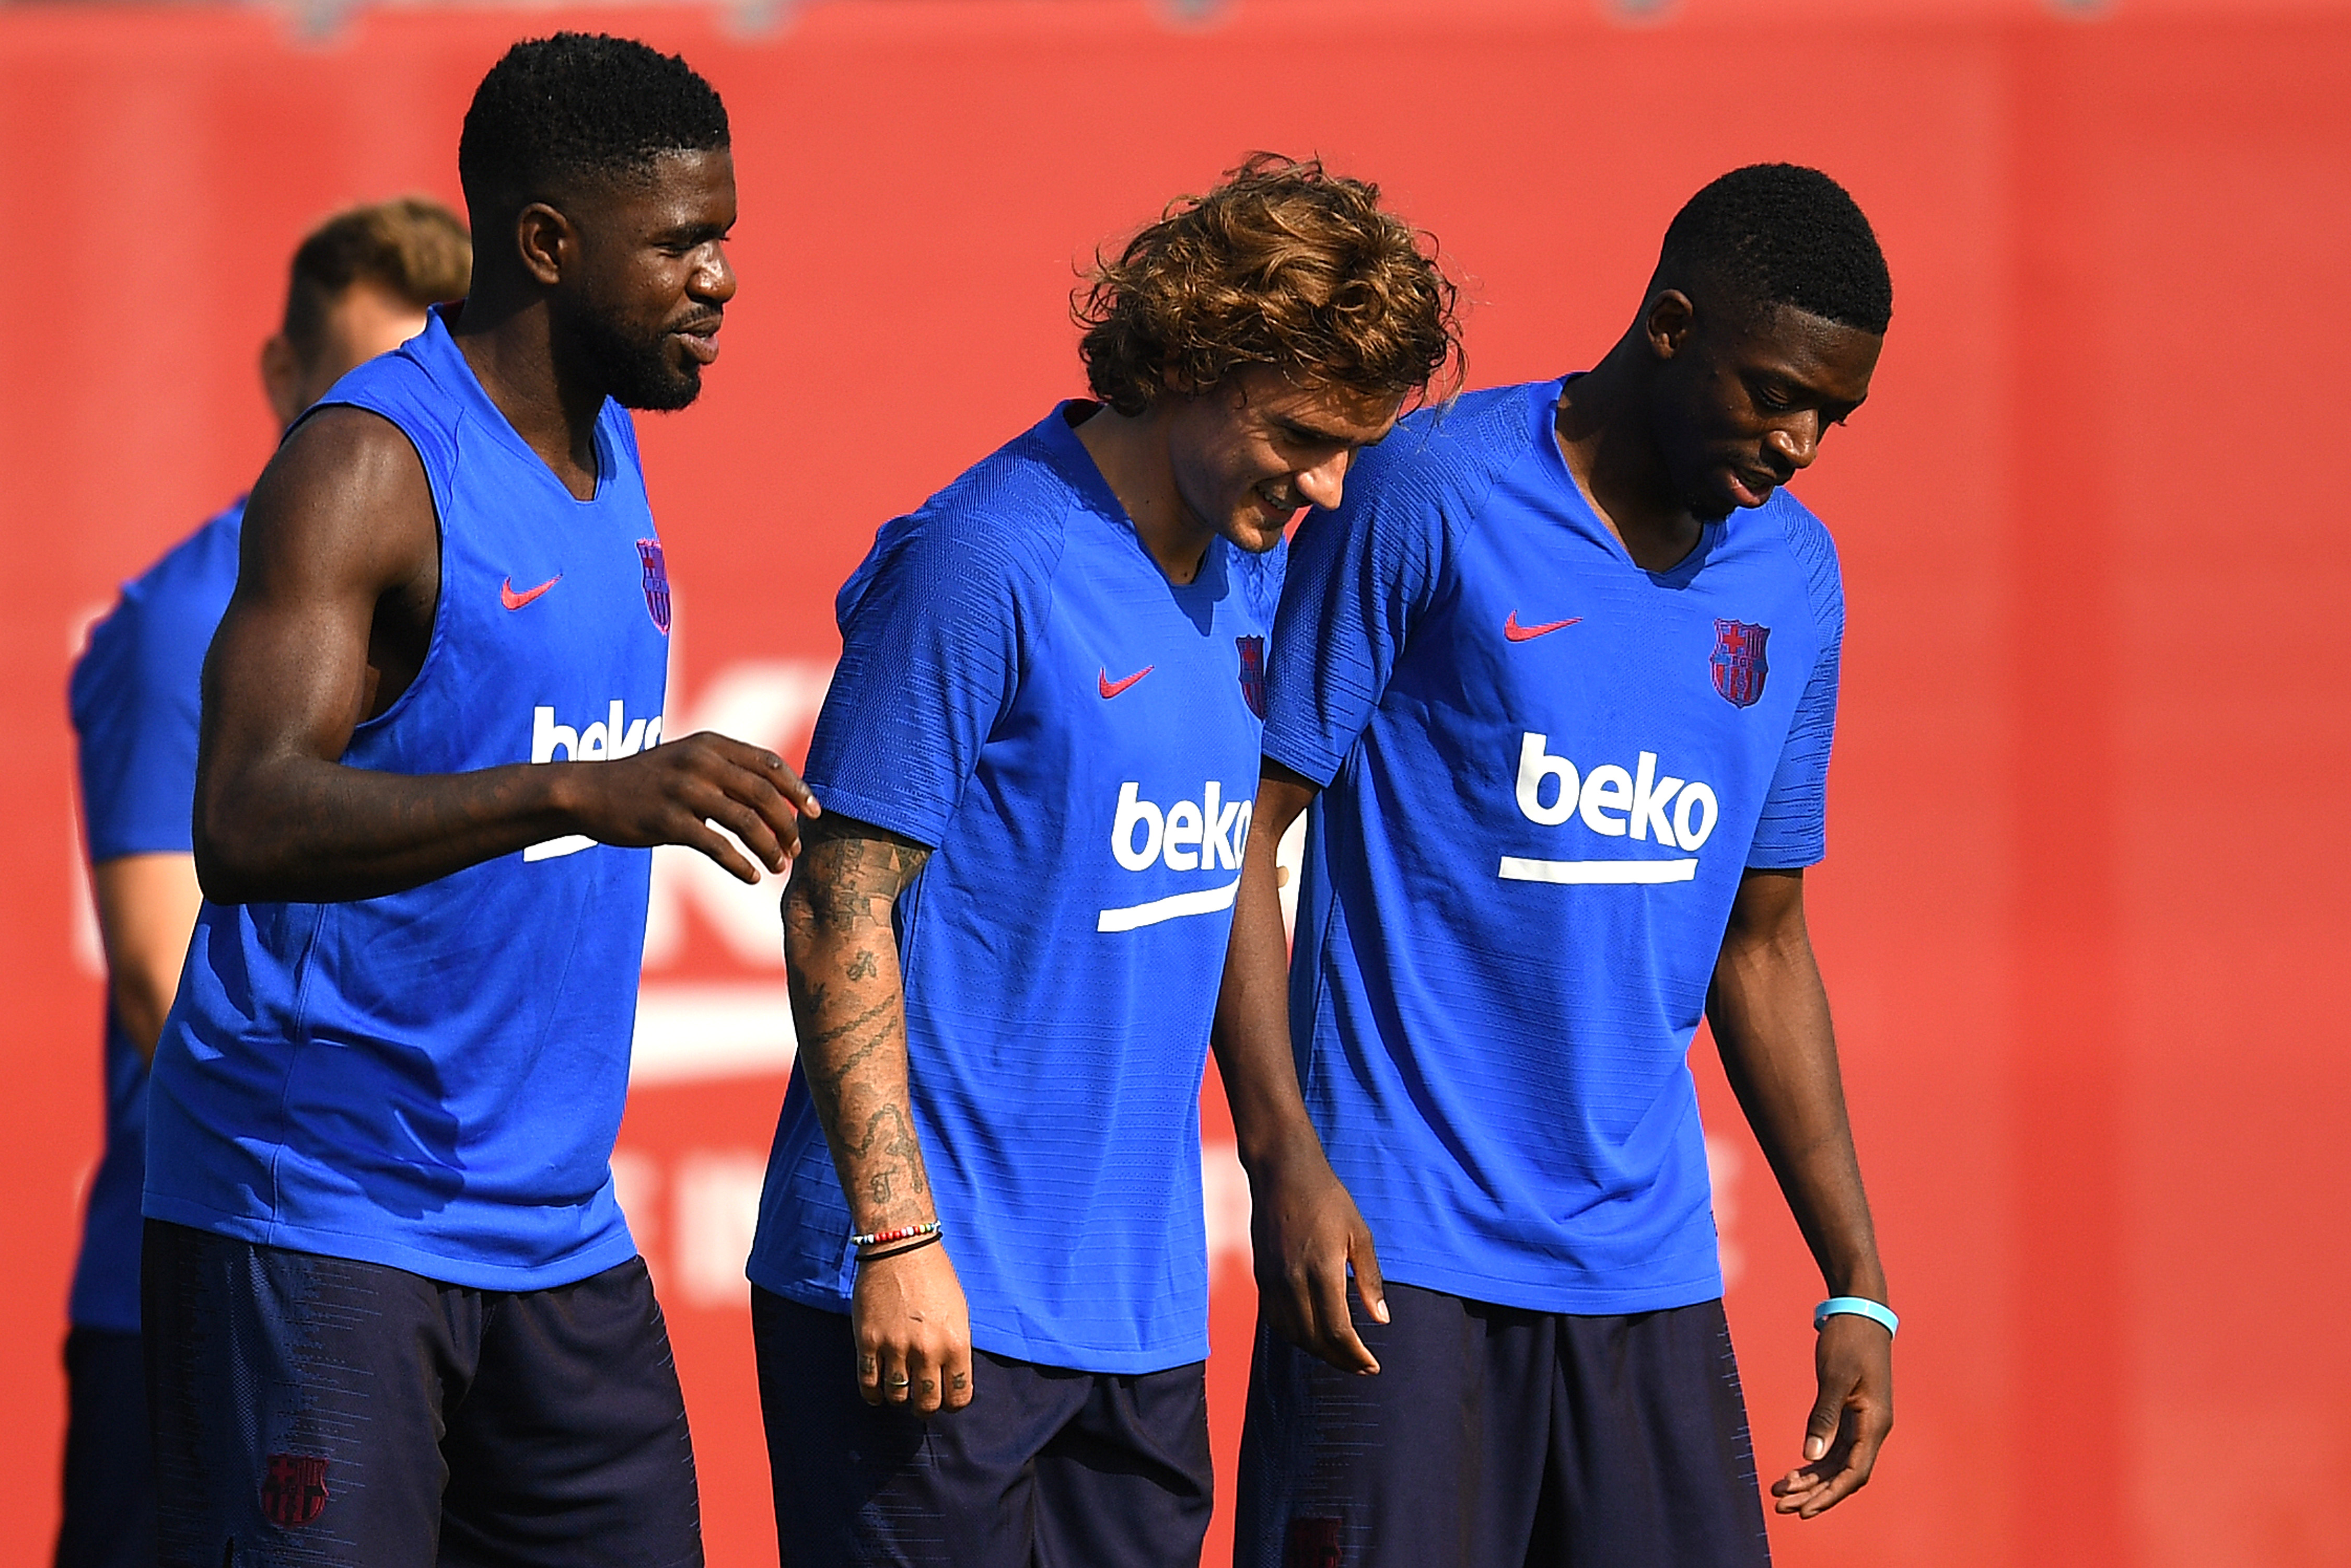 BARCELONA, SPAIN - JULY 15: Samuel Umtiti, Antoine Griezmann and Ousmane Dembele of FC Barcelona arrive at their first training session at Ciutat Esportiva of Sant Joan Despi on July 15, 2019 in Barcelona, Spain. (Photo by David Ramos/Getty Images)